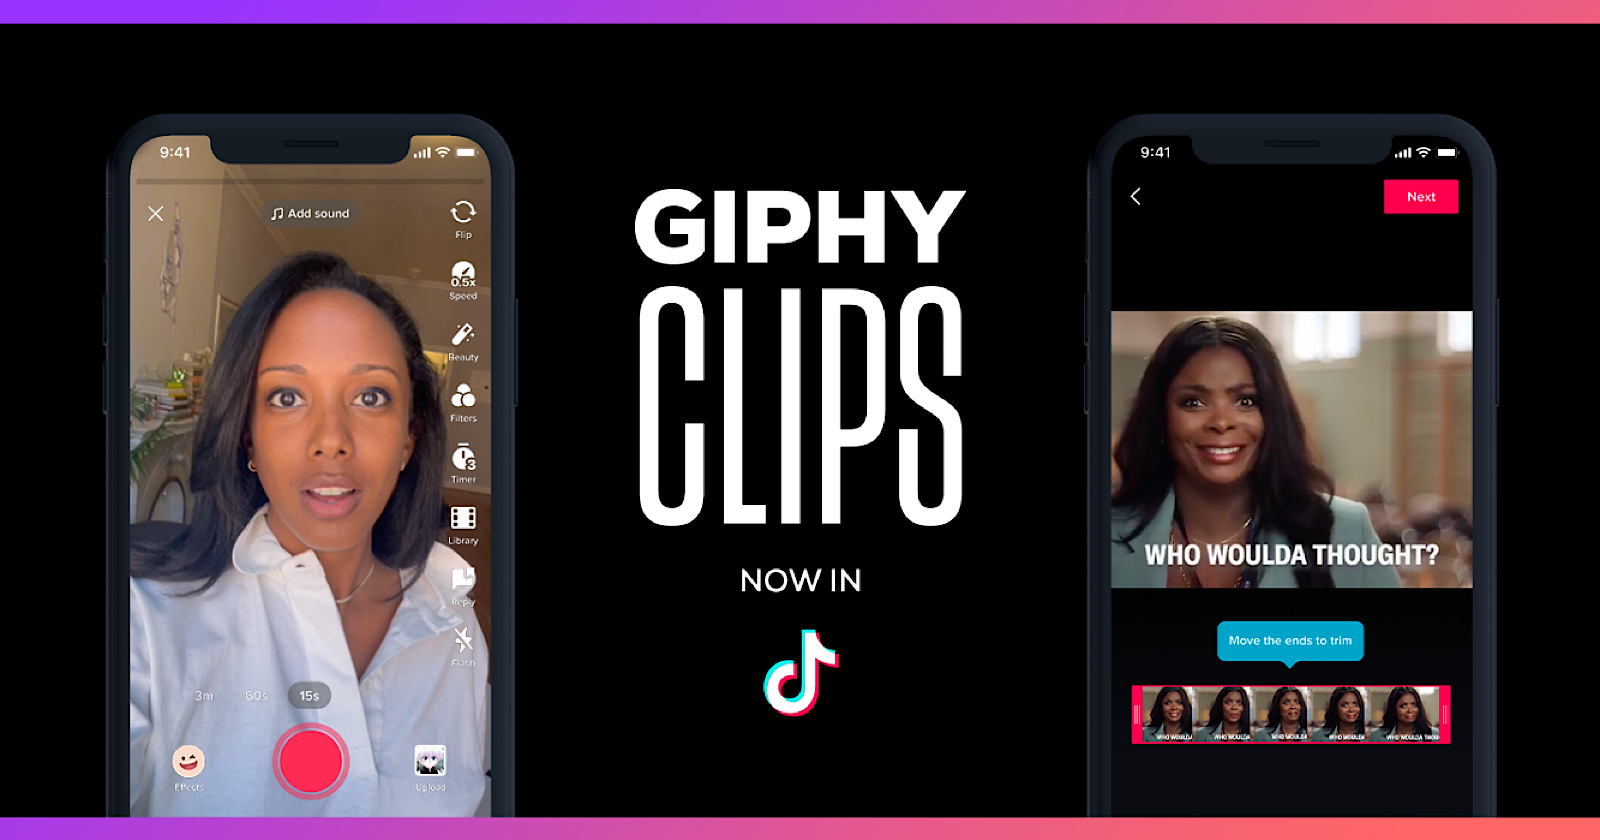 TikTok Taps Into GIPHY's Video Clips With New Editing Tool